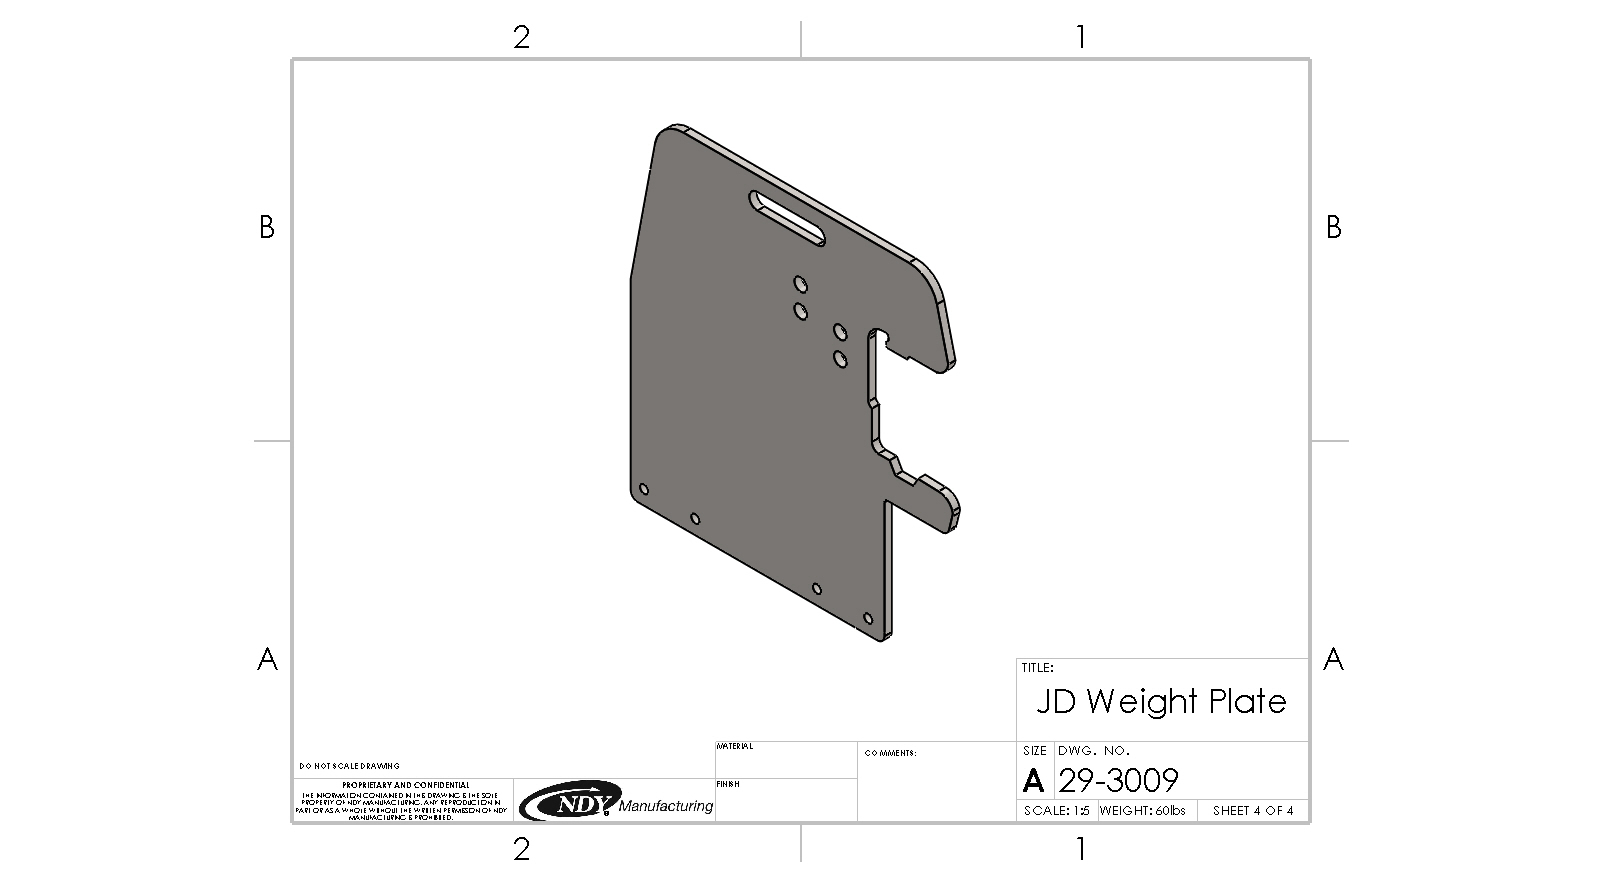 A drawing of the Rock Box Weight Plate fits John Deere.